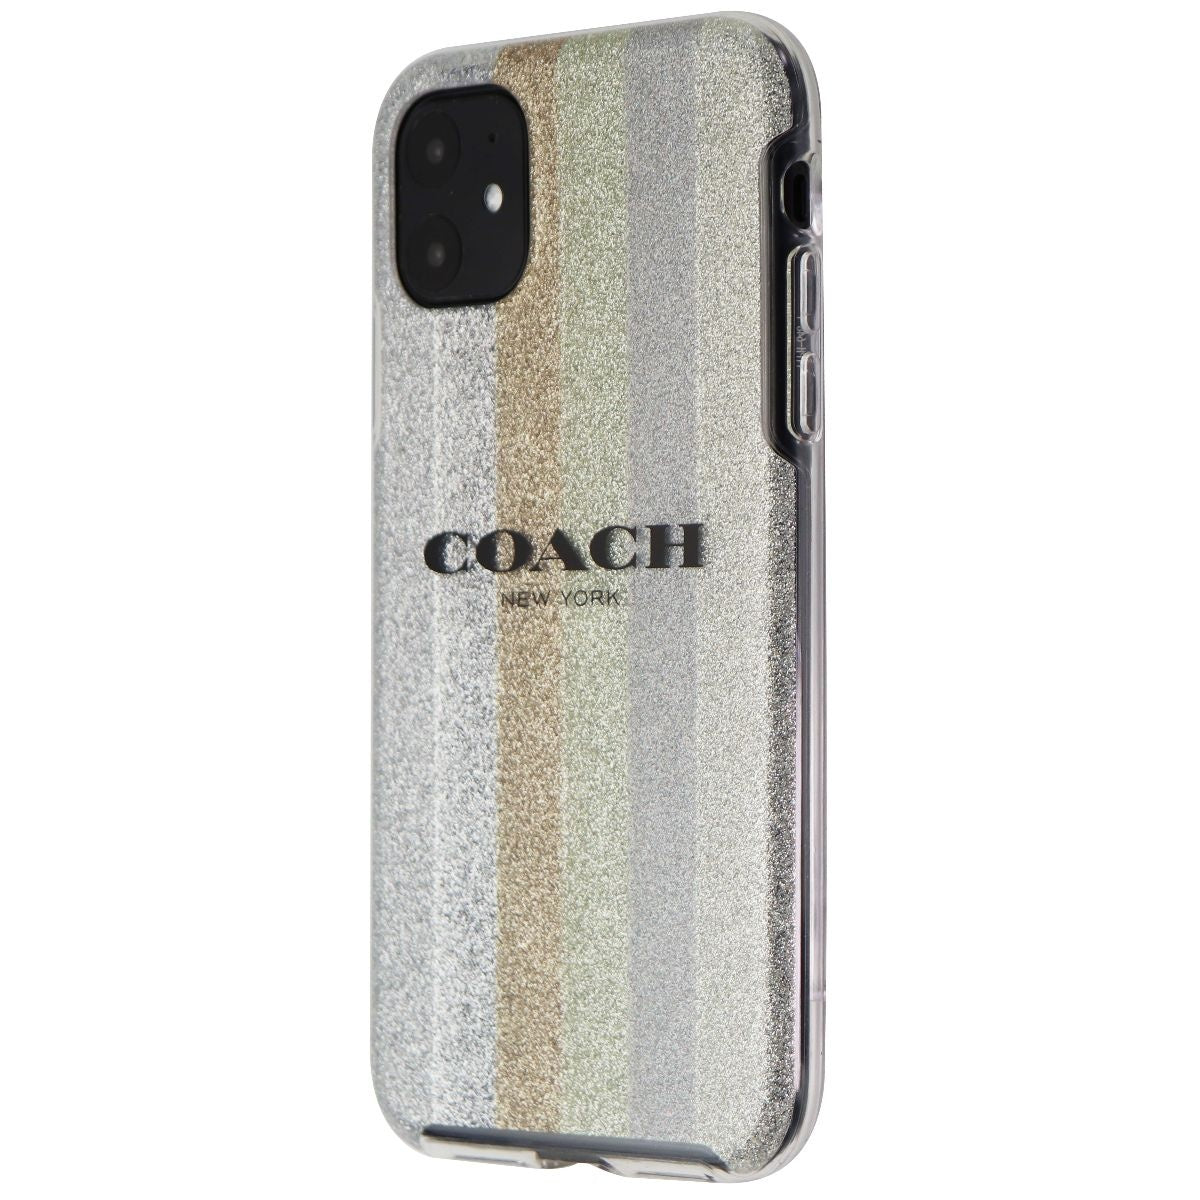 Coach Protective Case for Apple iPhone 11 (6.1-inch) - Glitter Americana